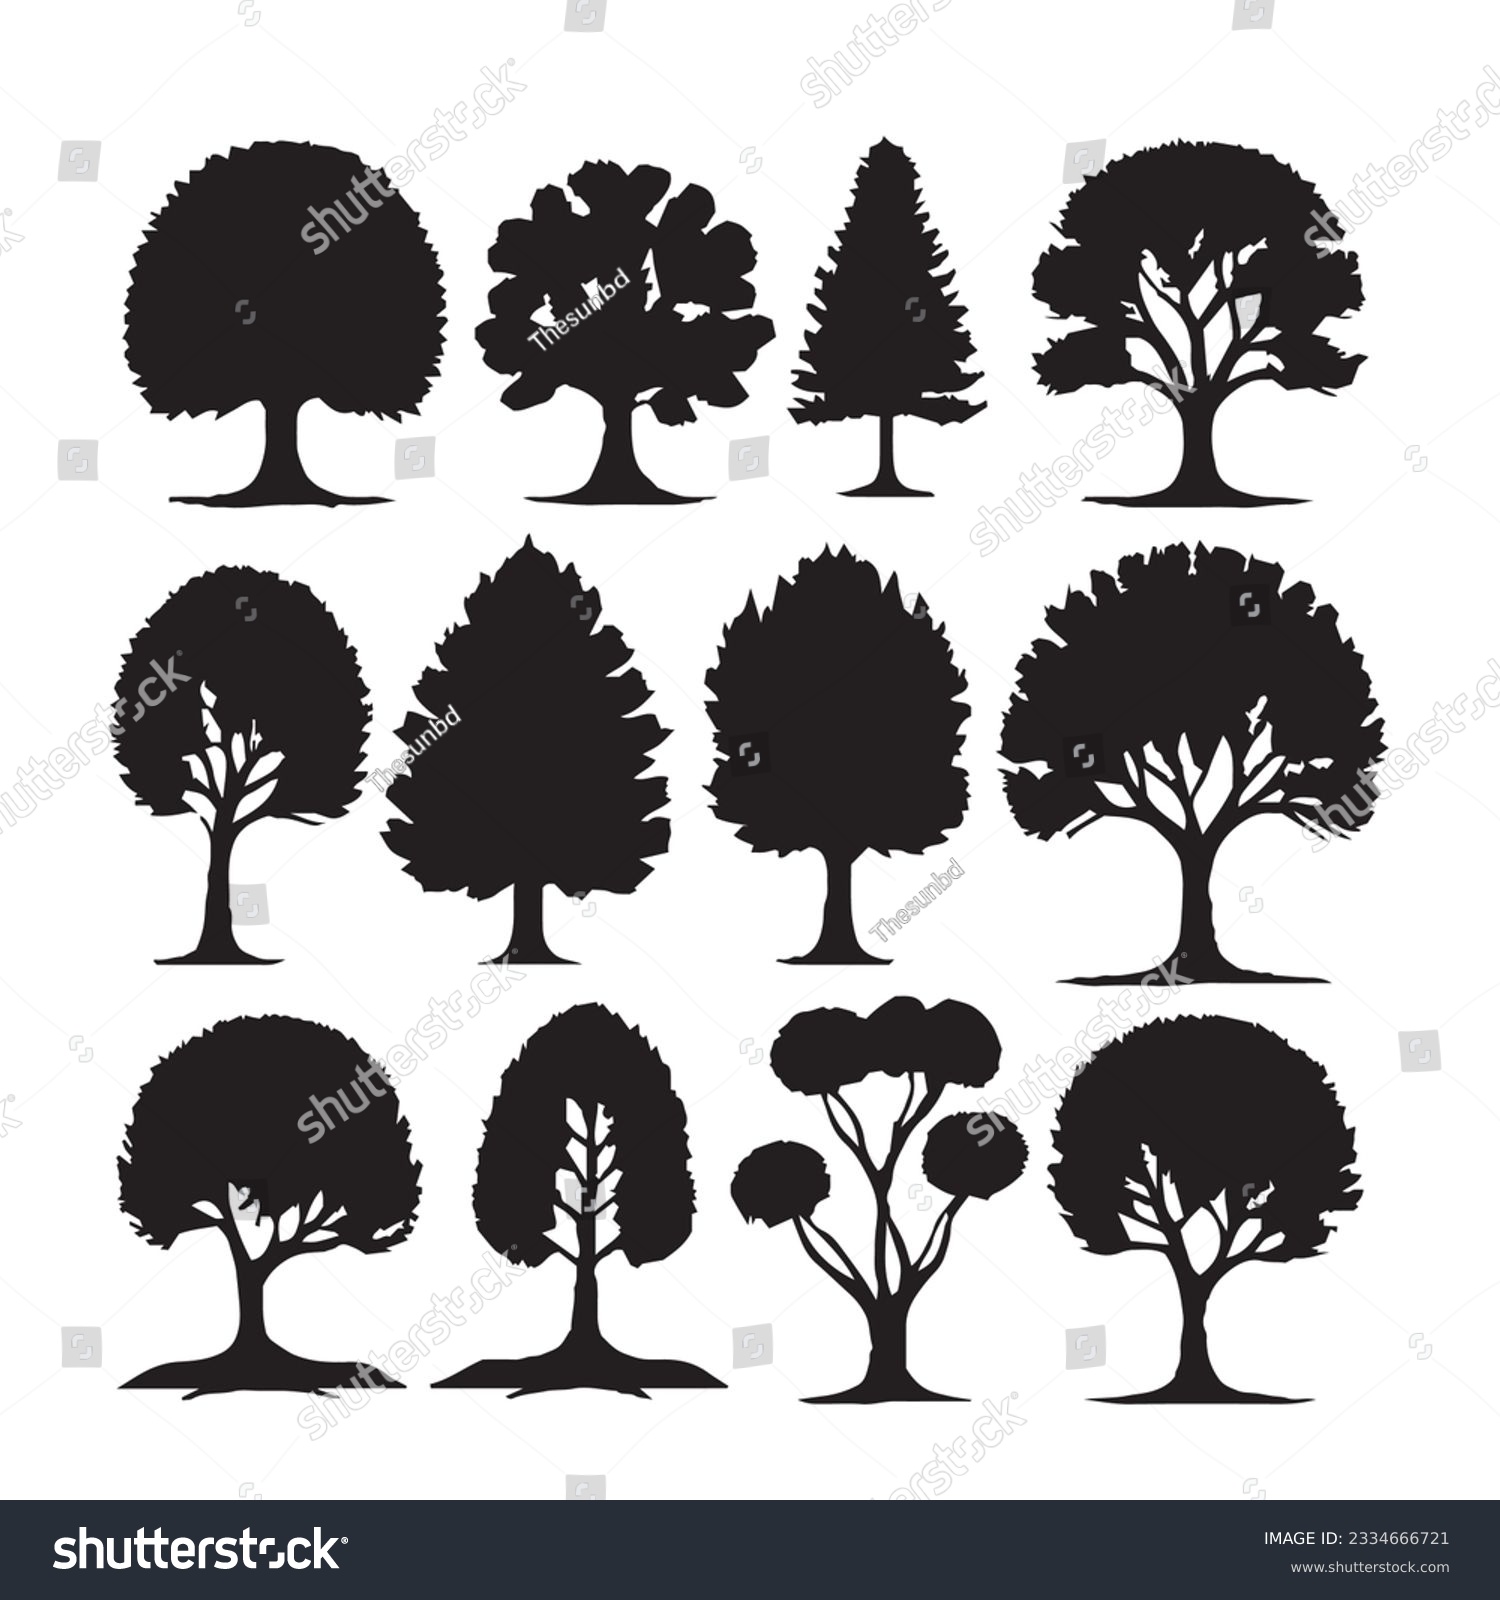 SVG of Tree silhouettes on white background svg